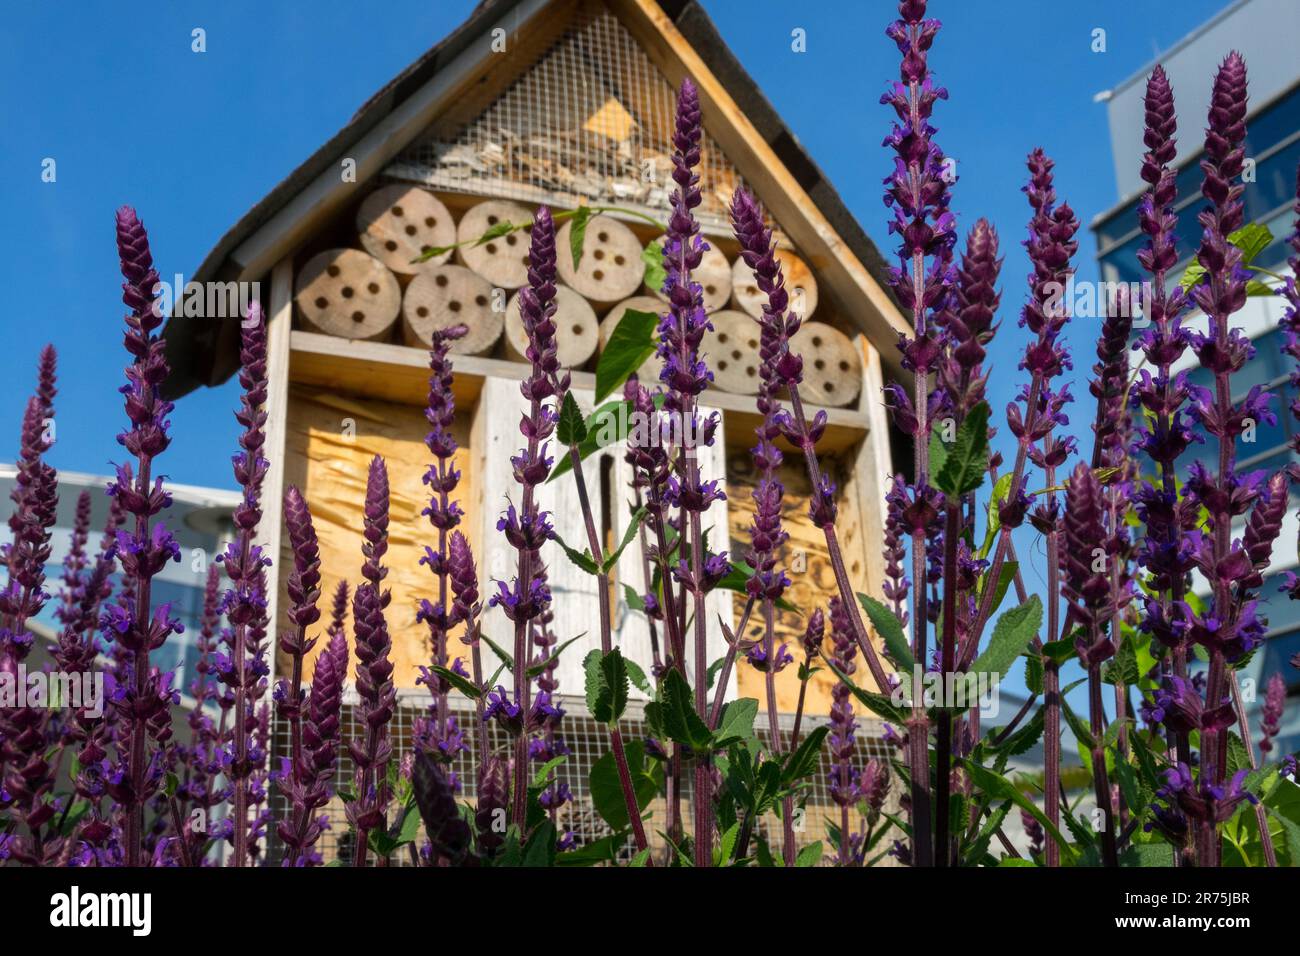 Insect hotel for Beneficial insects, Refuge place in Urban, City, Garden, Shelter, Bee-friendly Sage flowers Salvias, Environmentally friendly Stock Photo